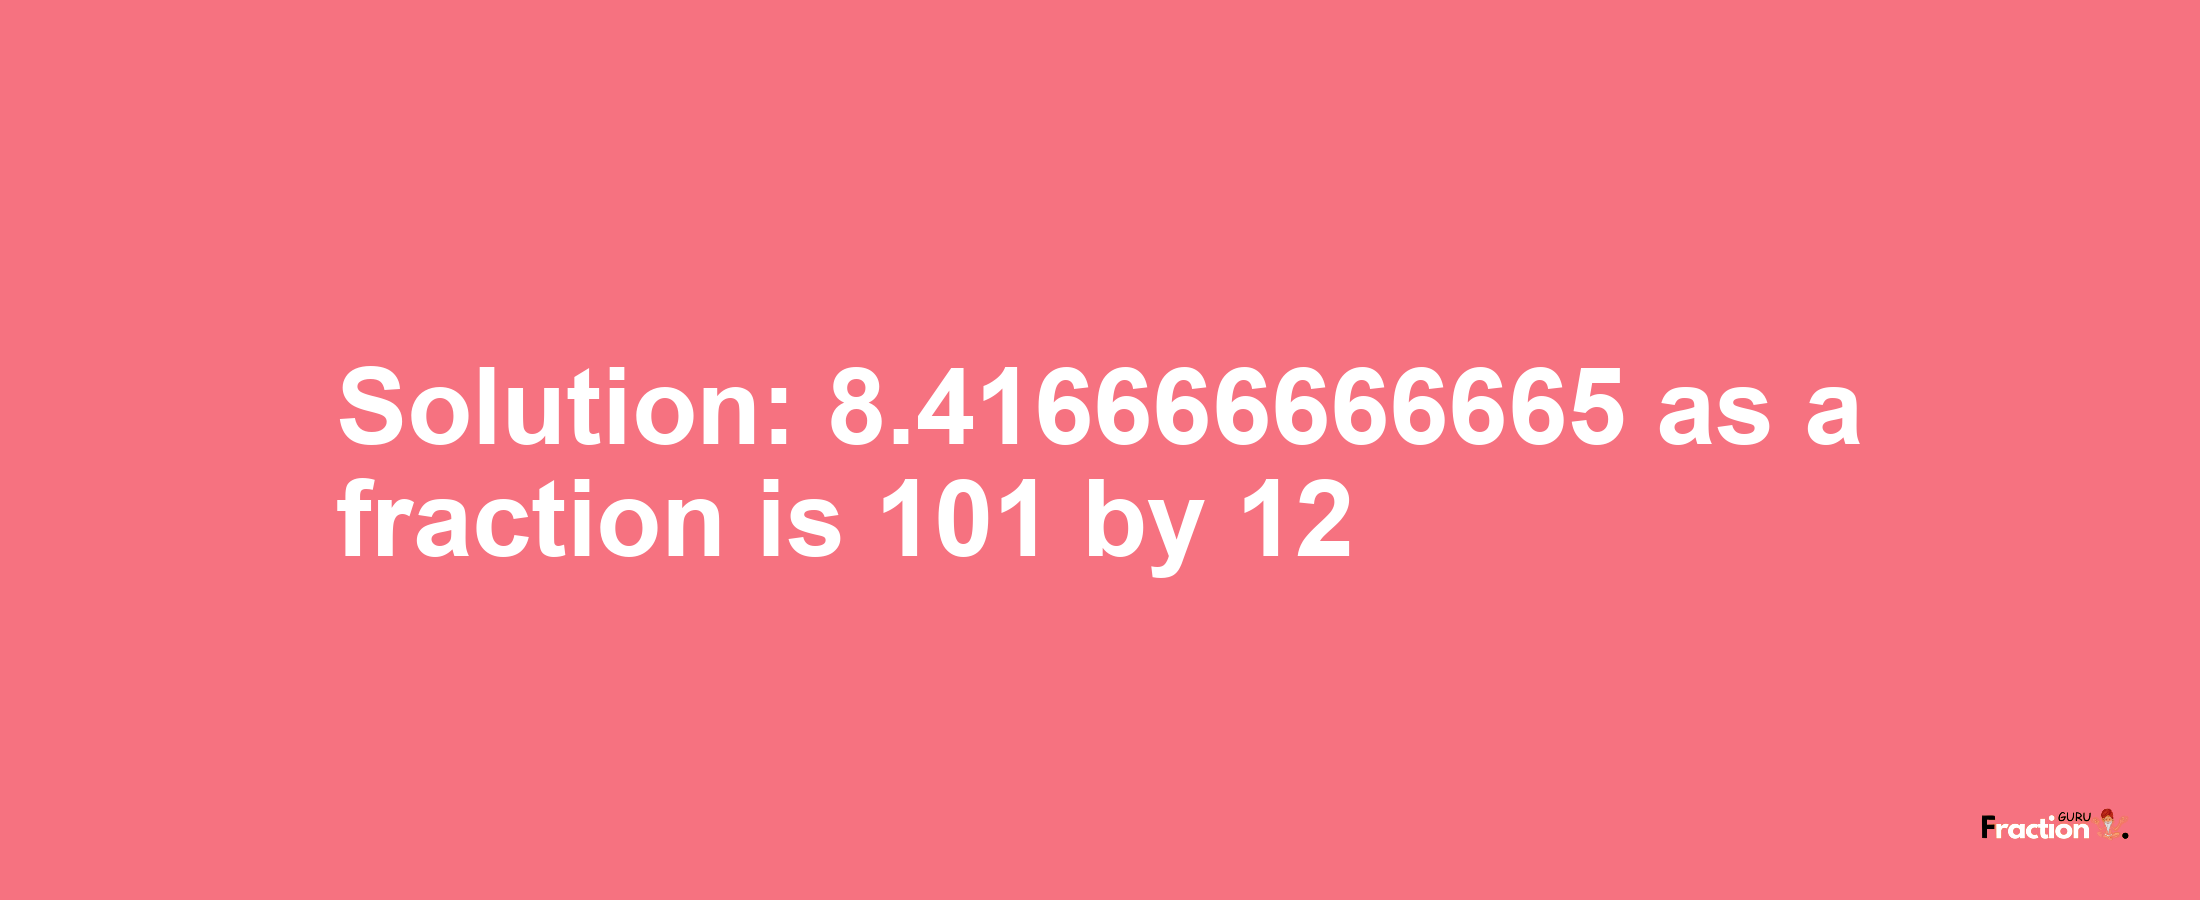 Solution:8.416666666665 as a fraction is 101/12